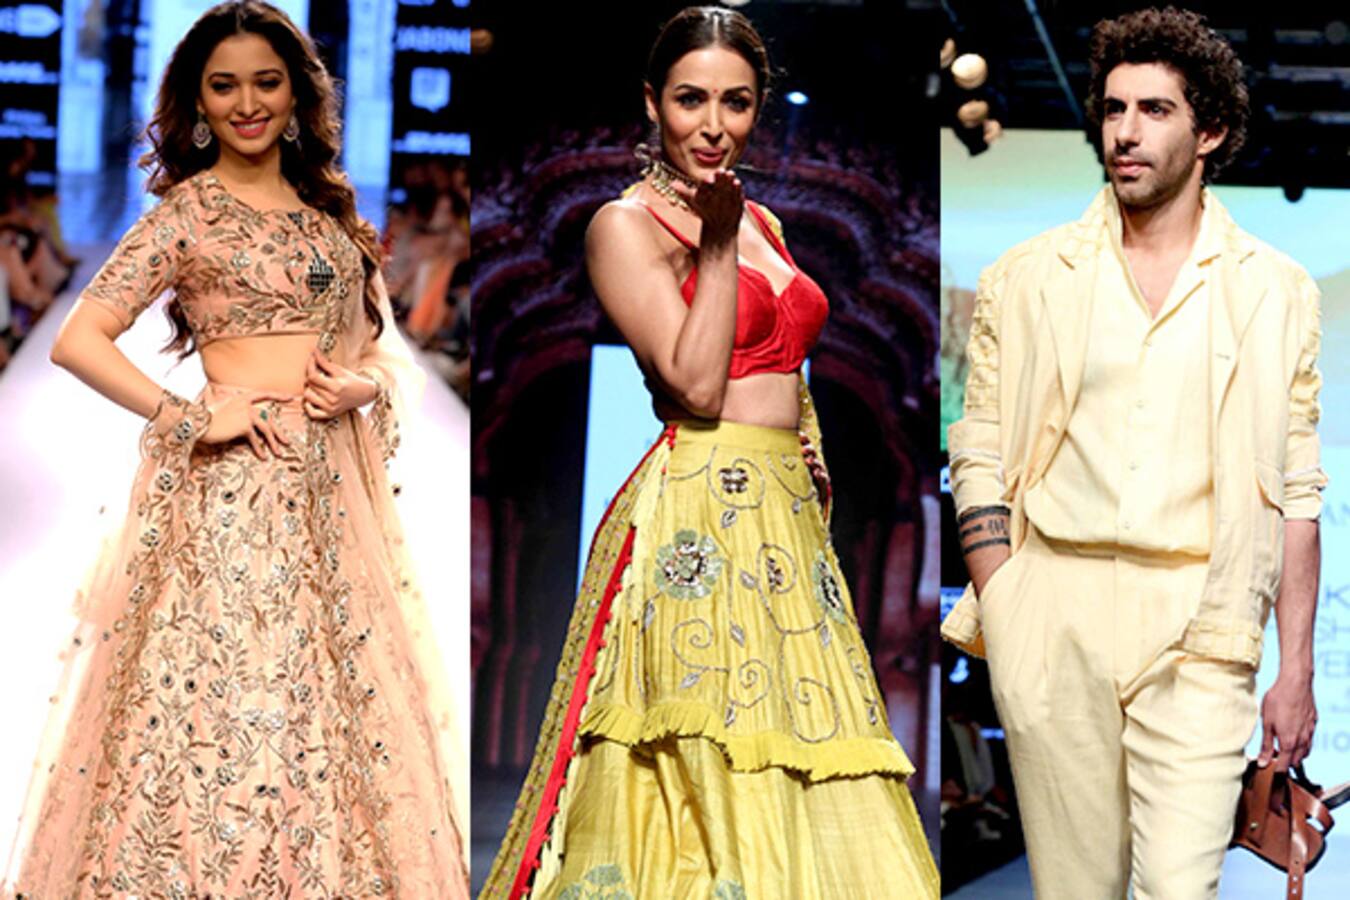 Tamannaah cancels her walk, Jim goes down on his knees for Malaika: 3 behind-the-scene moments on day 5 at the LFW 2017 that no one else will tell you about